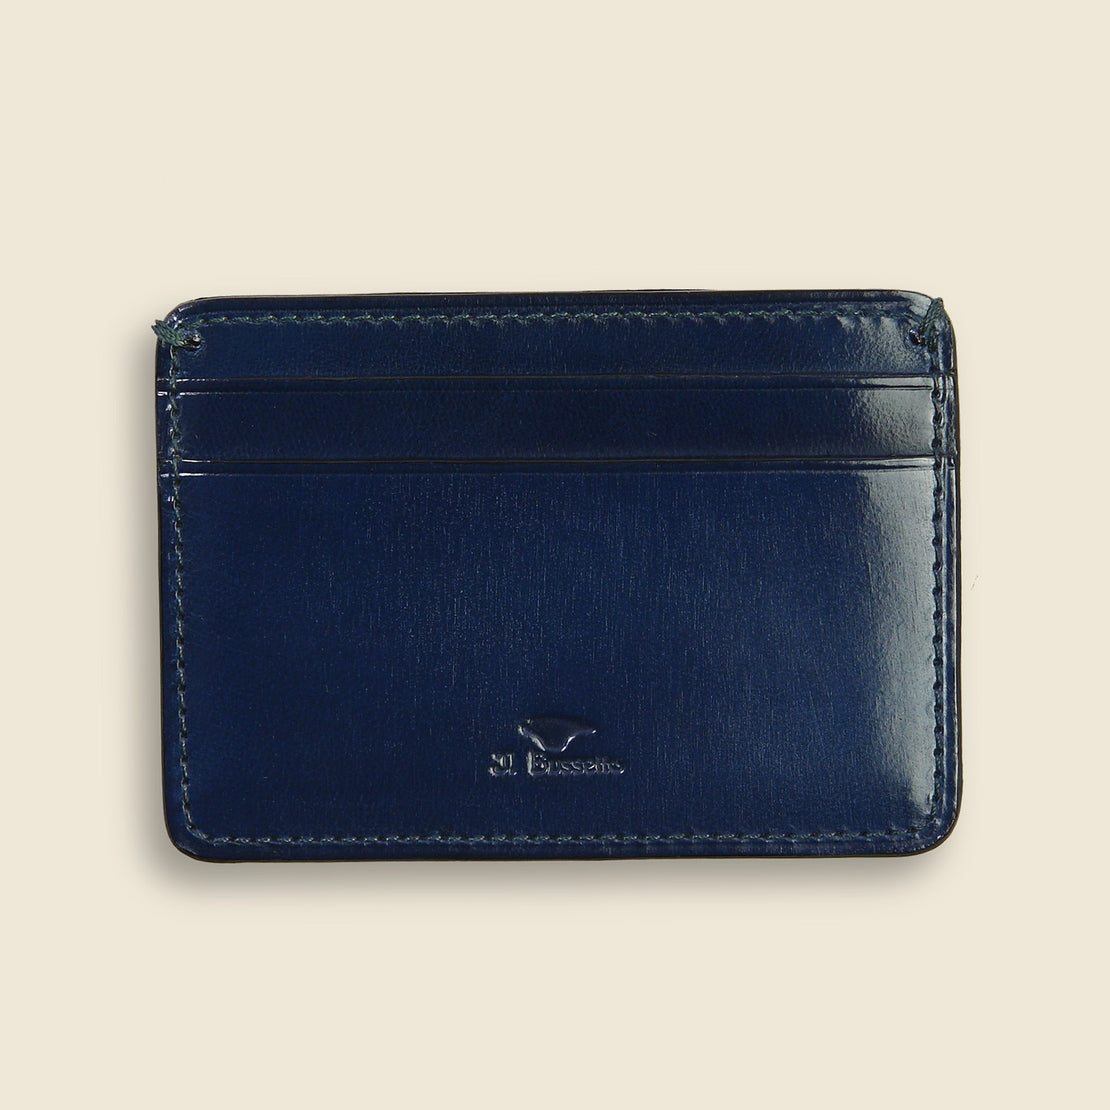 Il Bussetto Credit Card Case - Navy